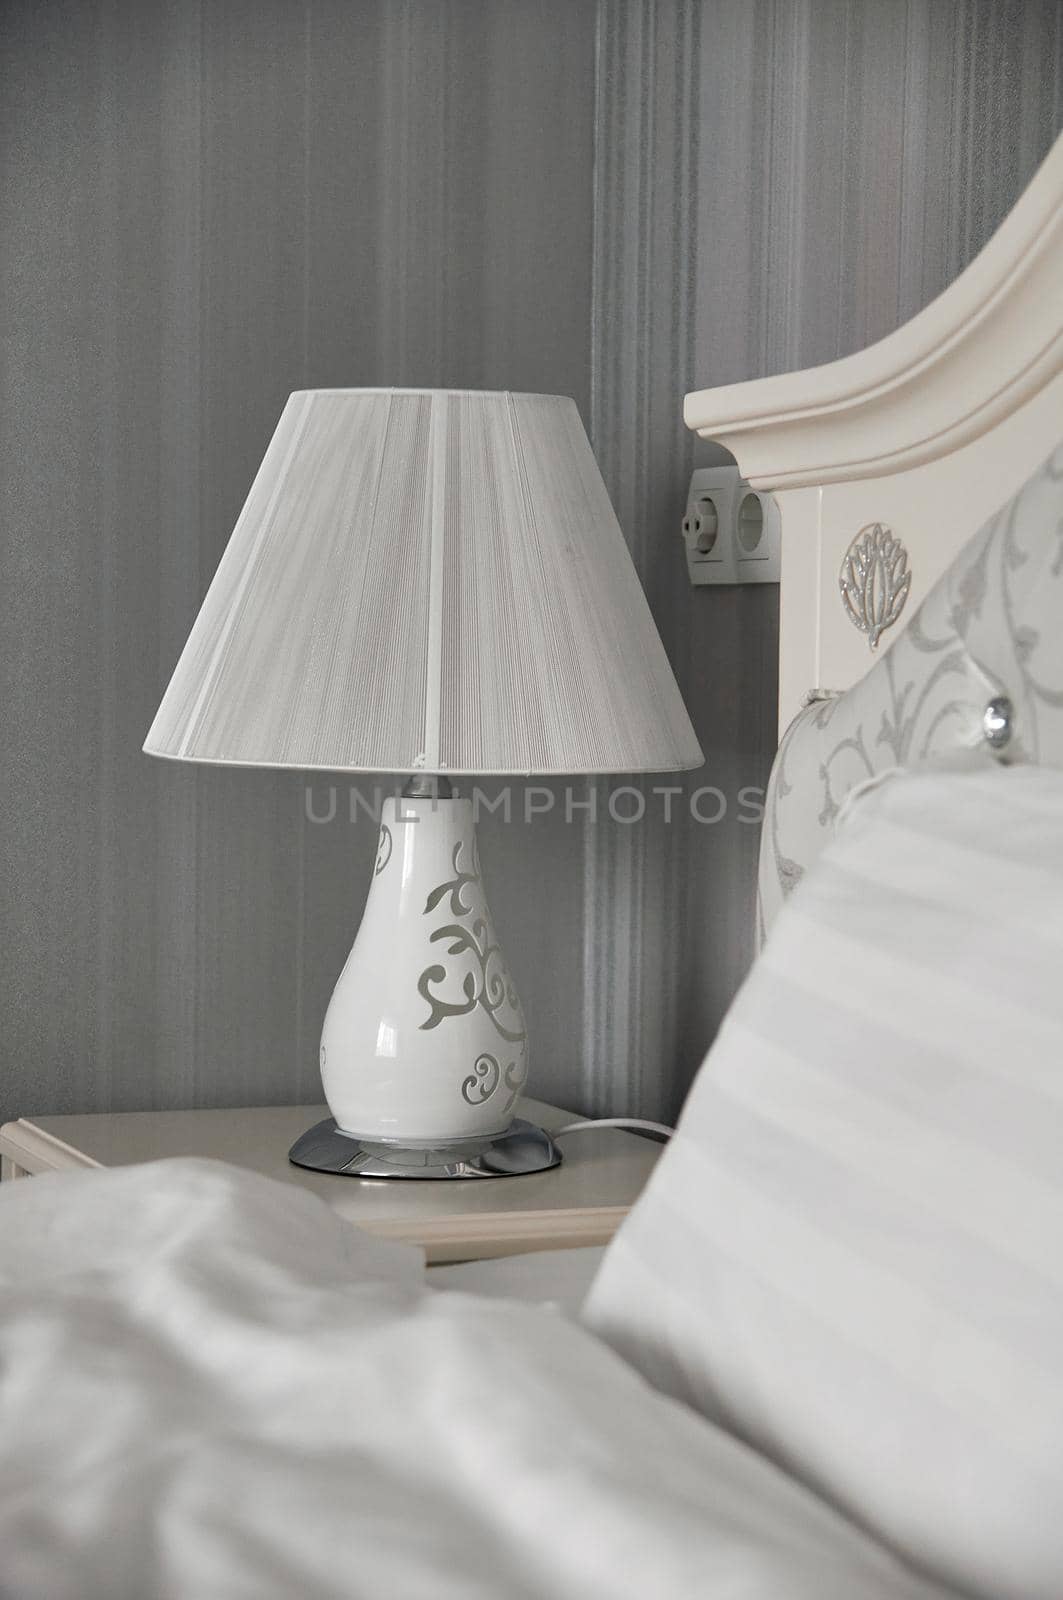 table lamp on a bedside table in a bedroom with gray walls near the bed is lit with yellow light